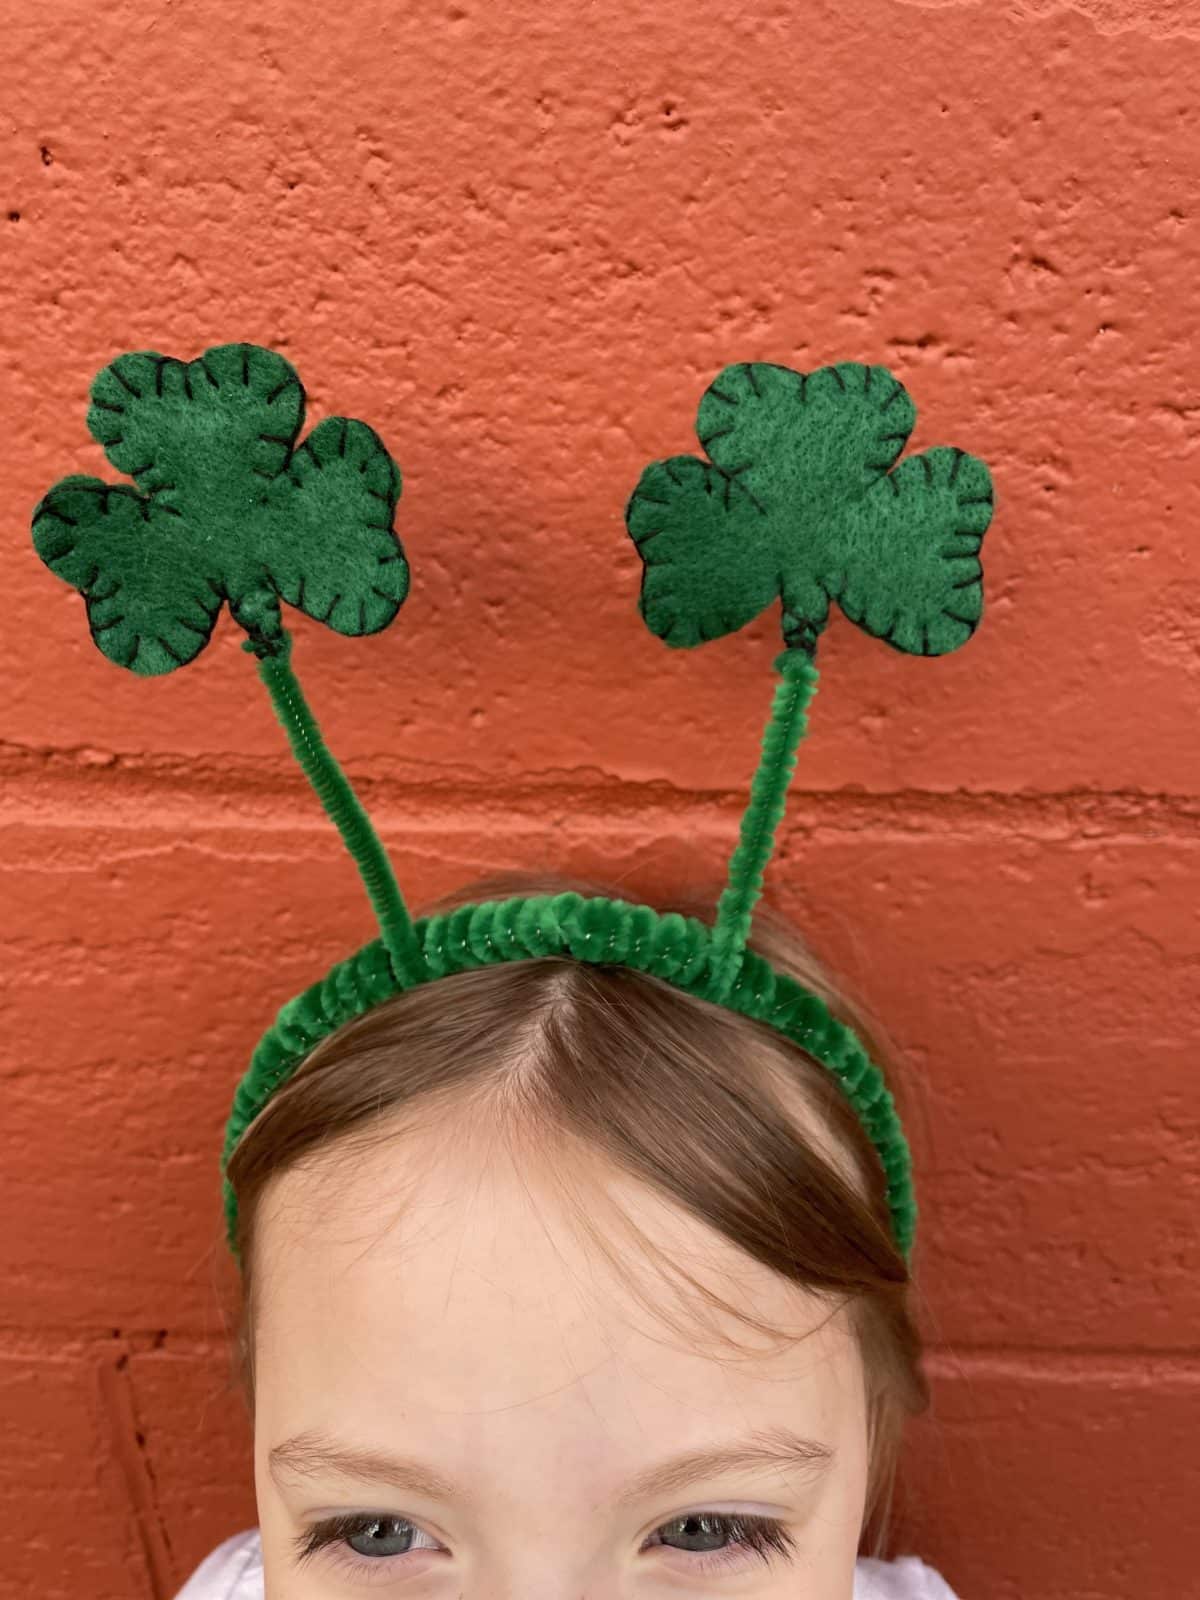 st-patrick-s-day-headband-and-hair-clip-5-out-of-4-patterns